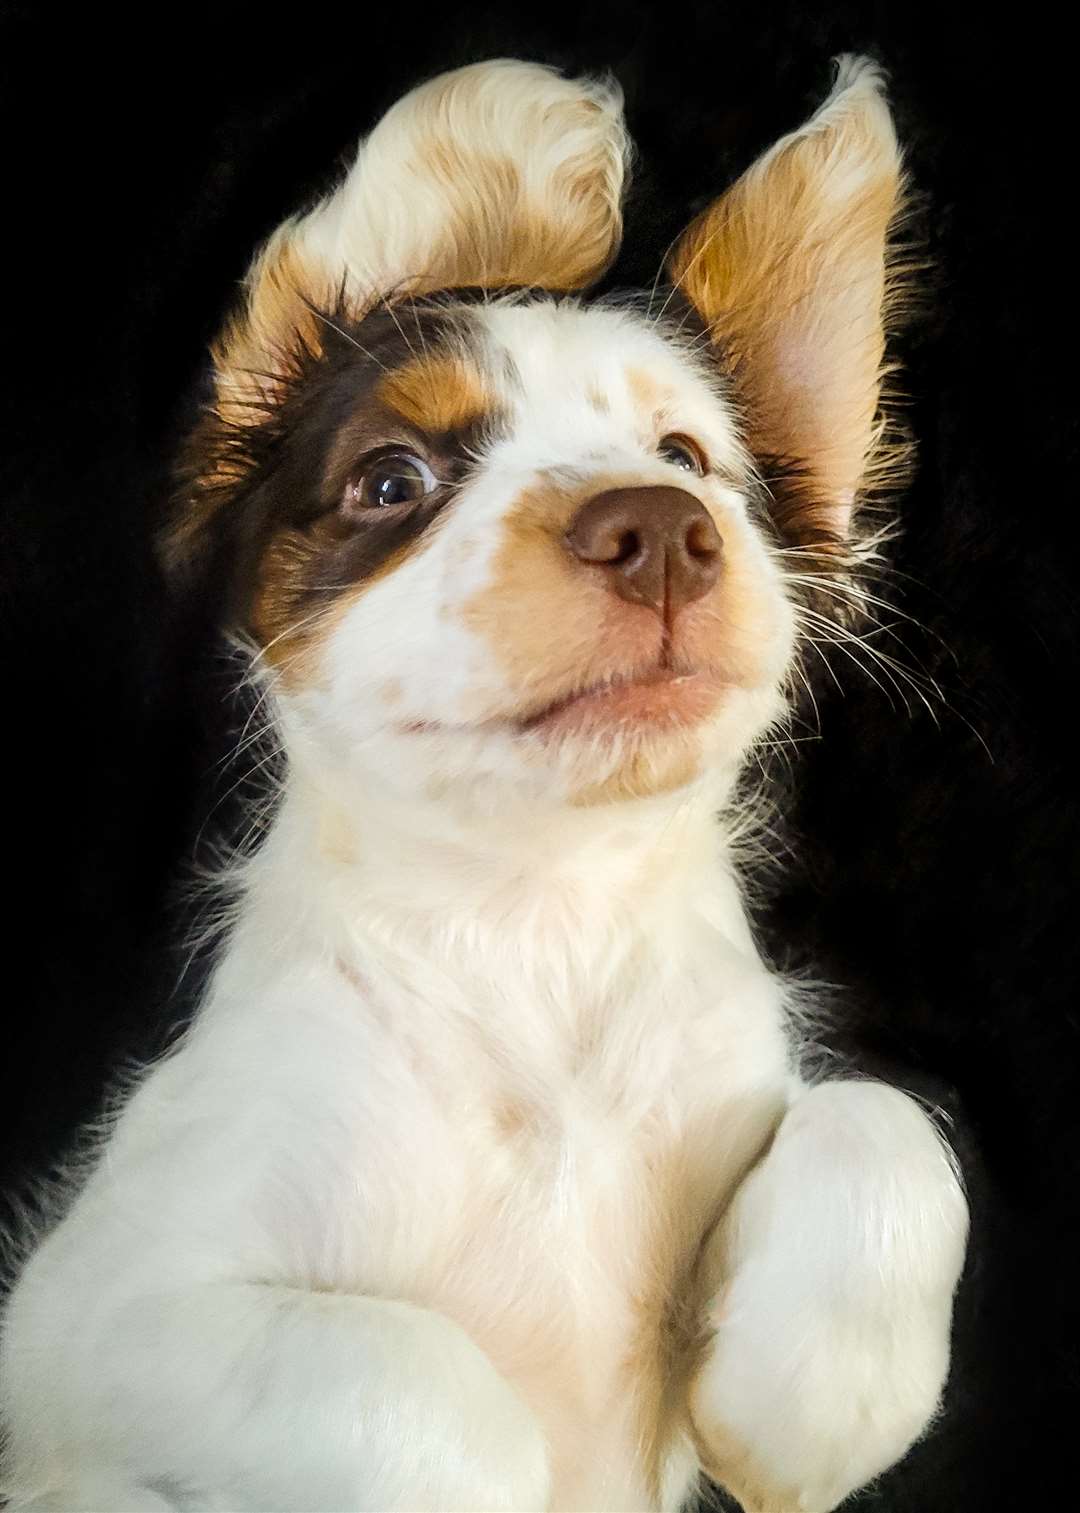 Demmi Havenhand saw “Baby Face”, her portrait of puppy Carrie, win the Pet Personalities category (Demmi Havenhand/PA)